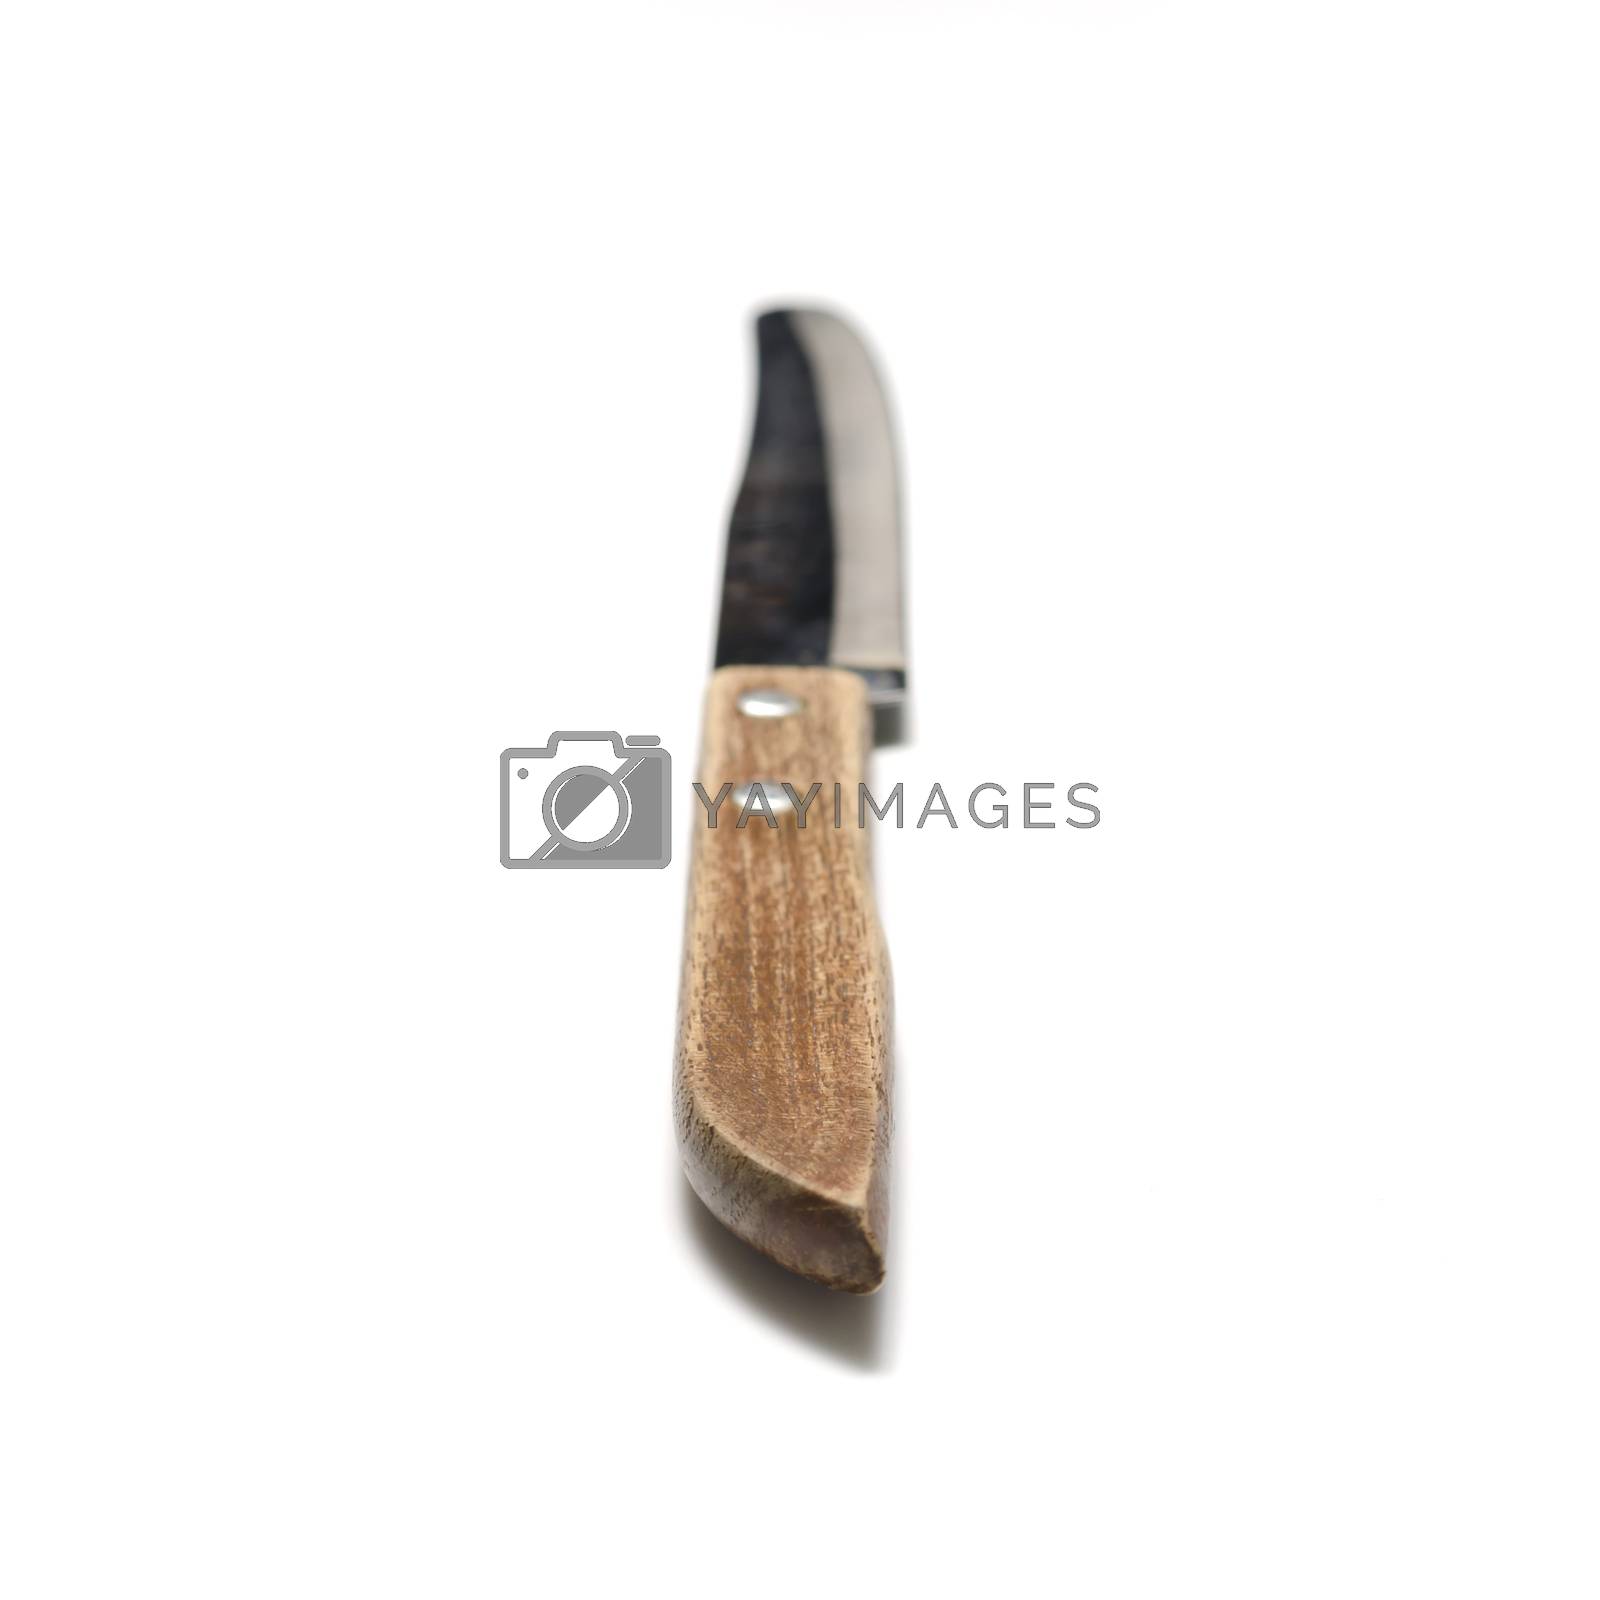 Royalty free image of old used knife by ammza12